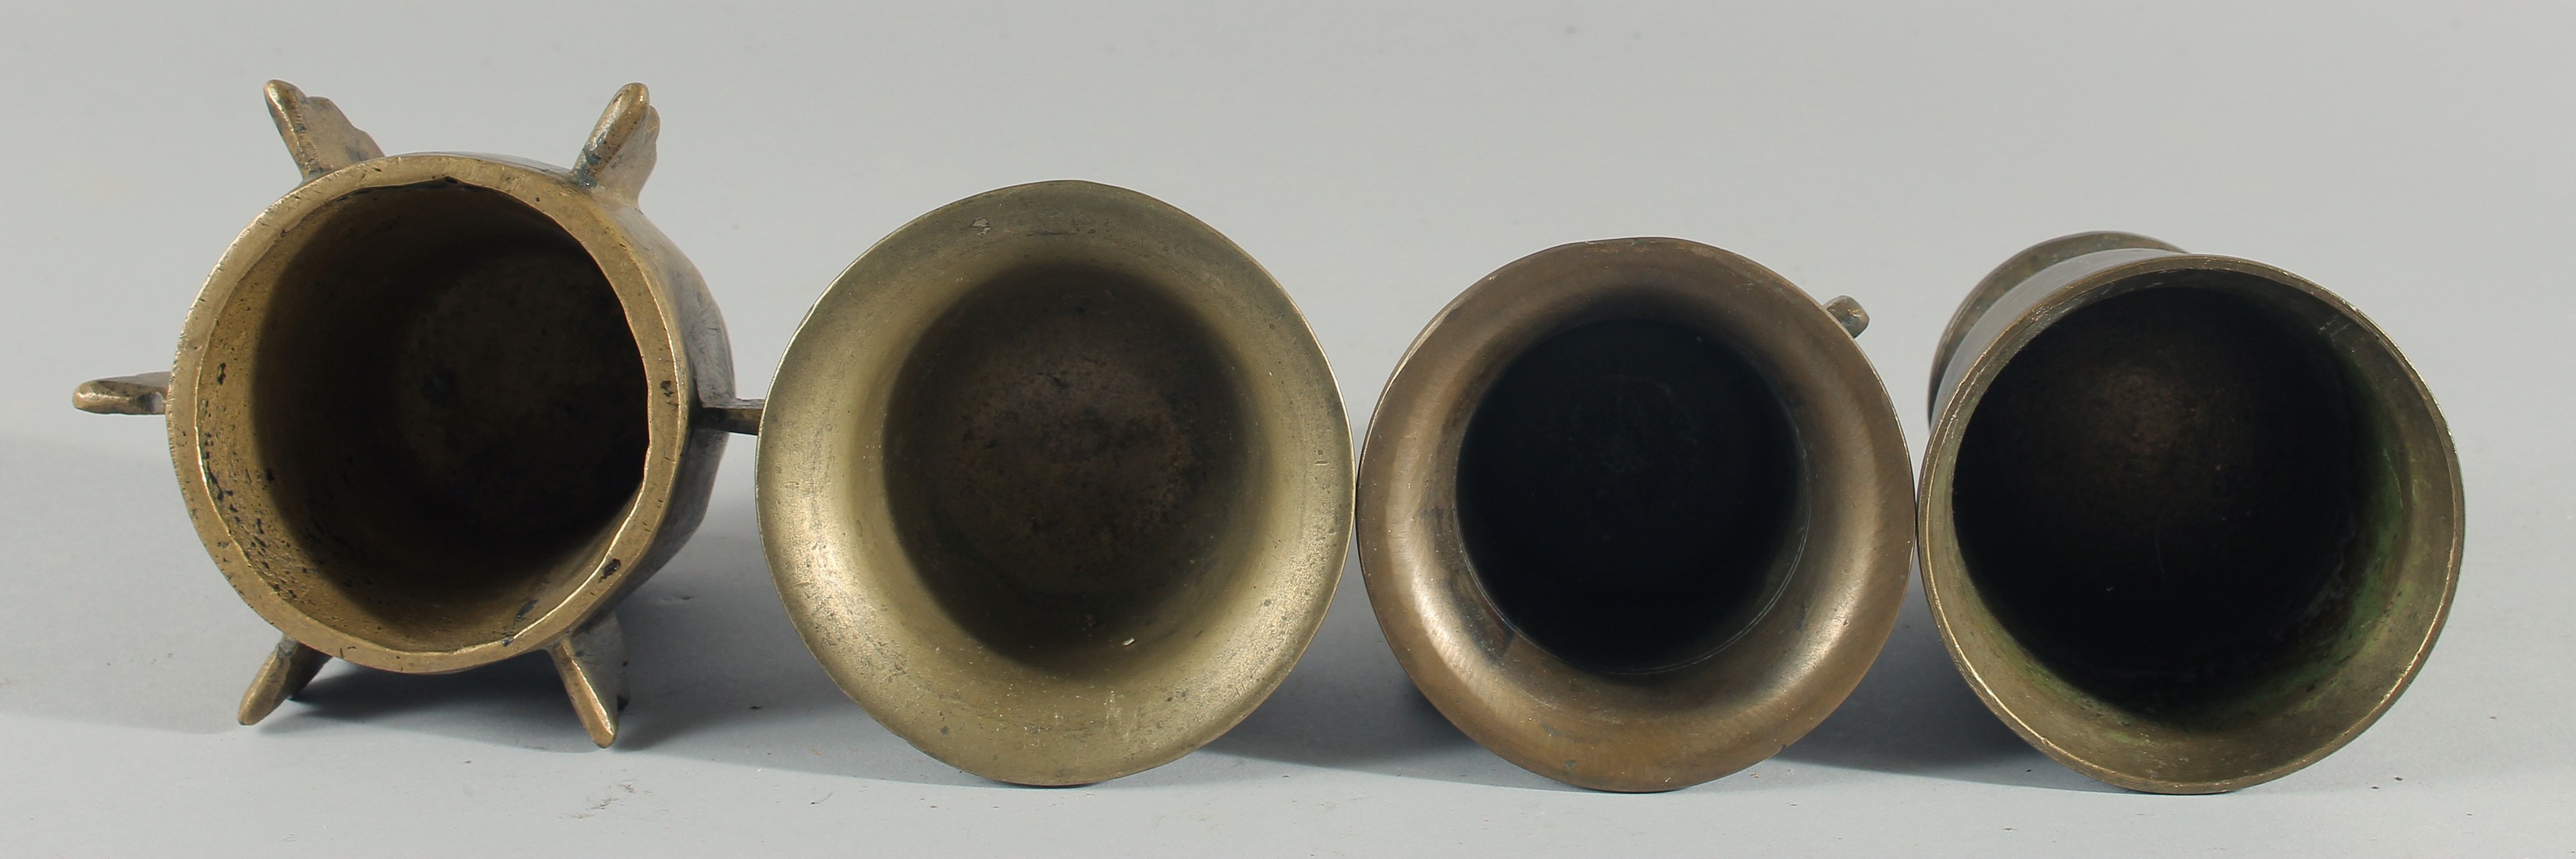 A COLLECTION OF FOUR BRONZE PESTLE AND MORTARS, (eight pieces). - Image 4 of 5